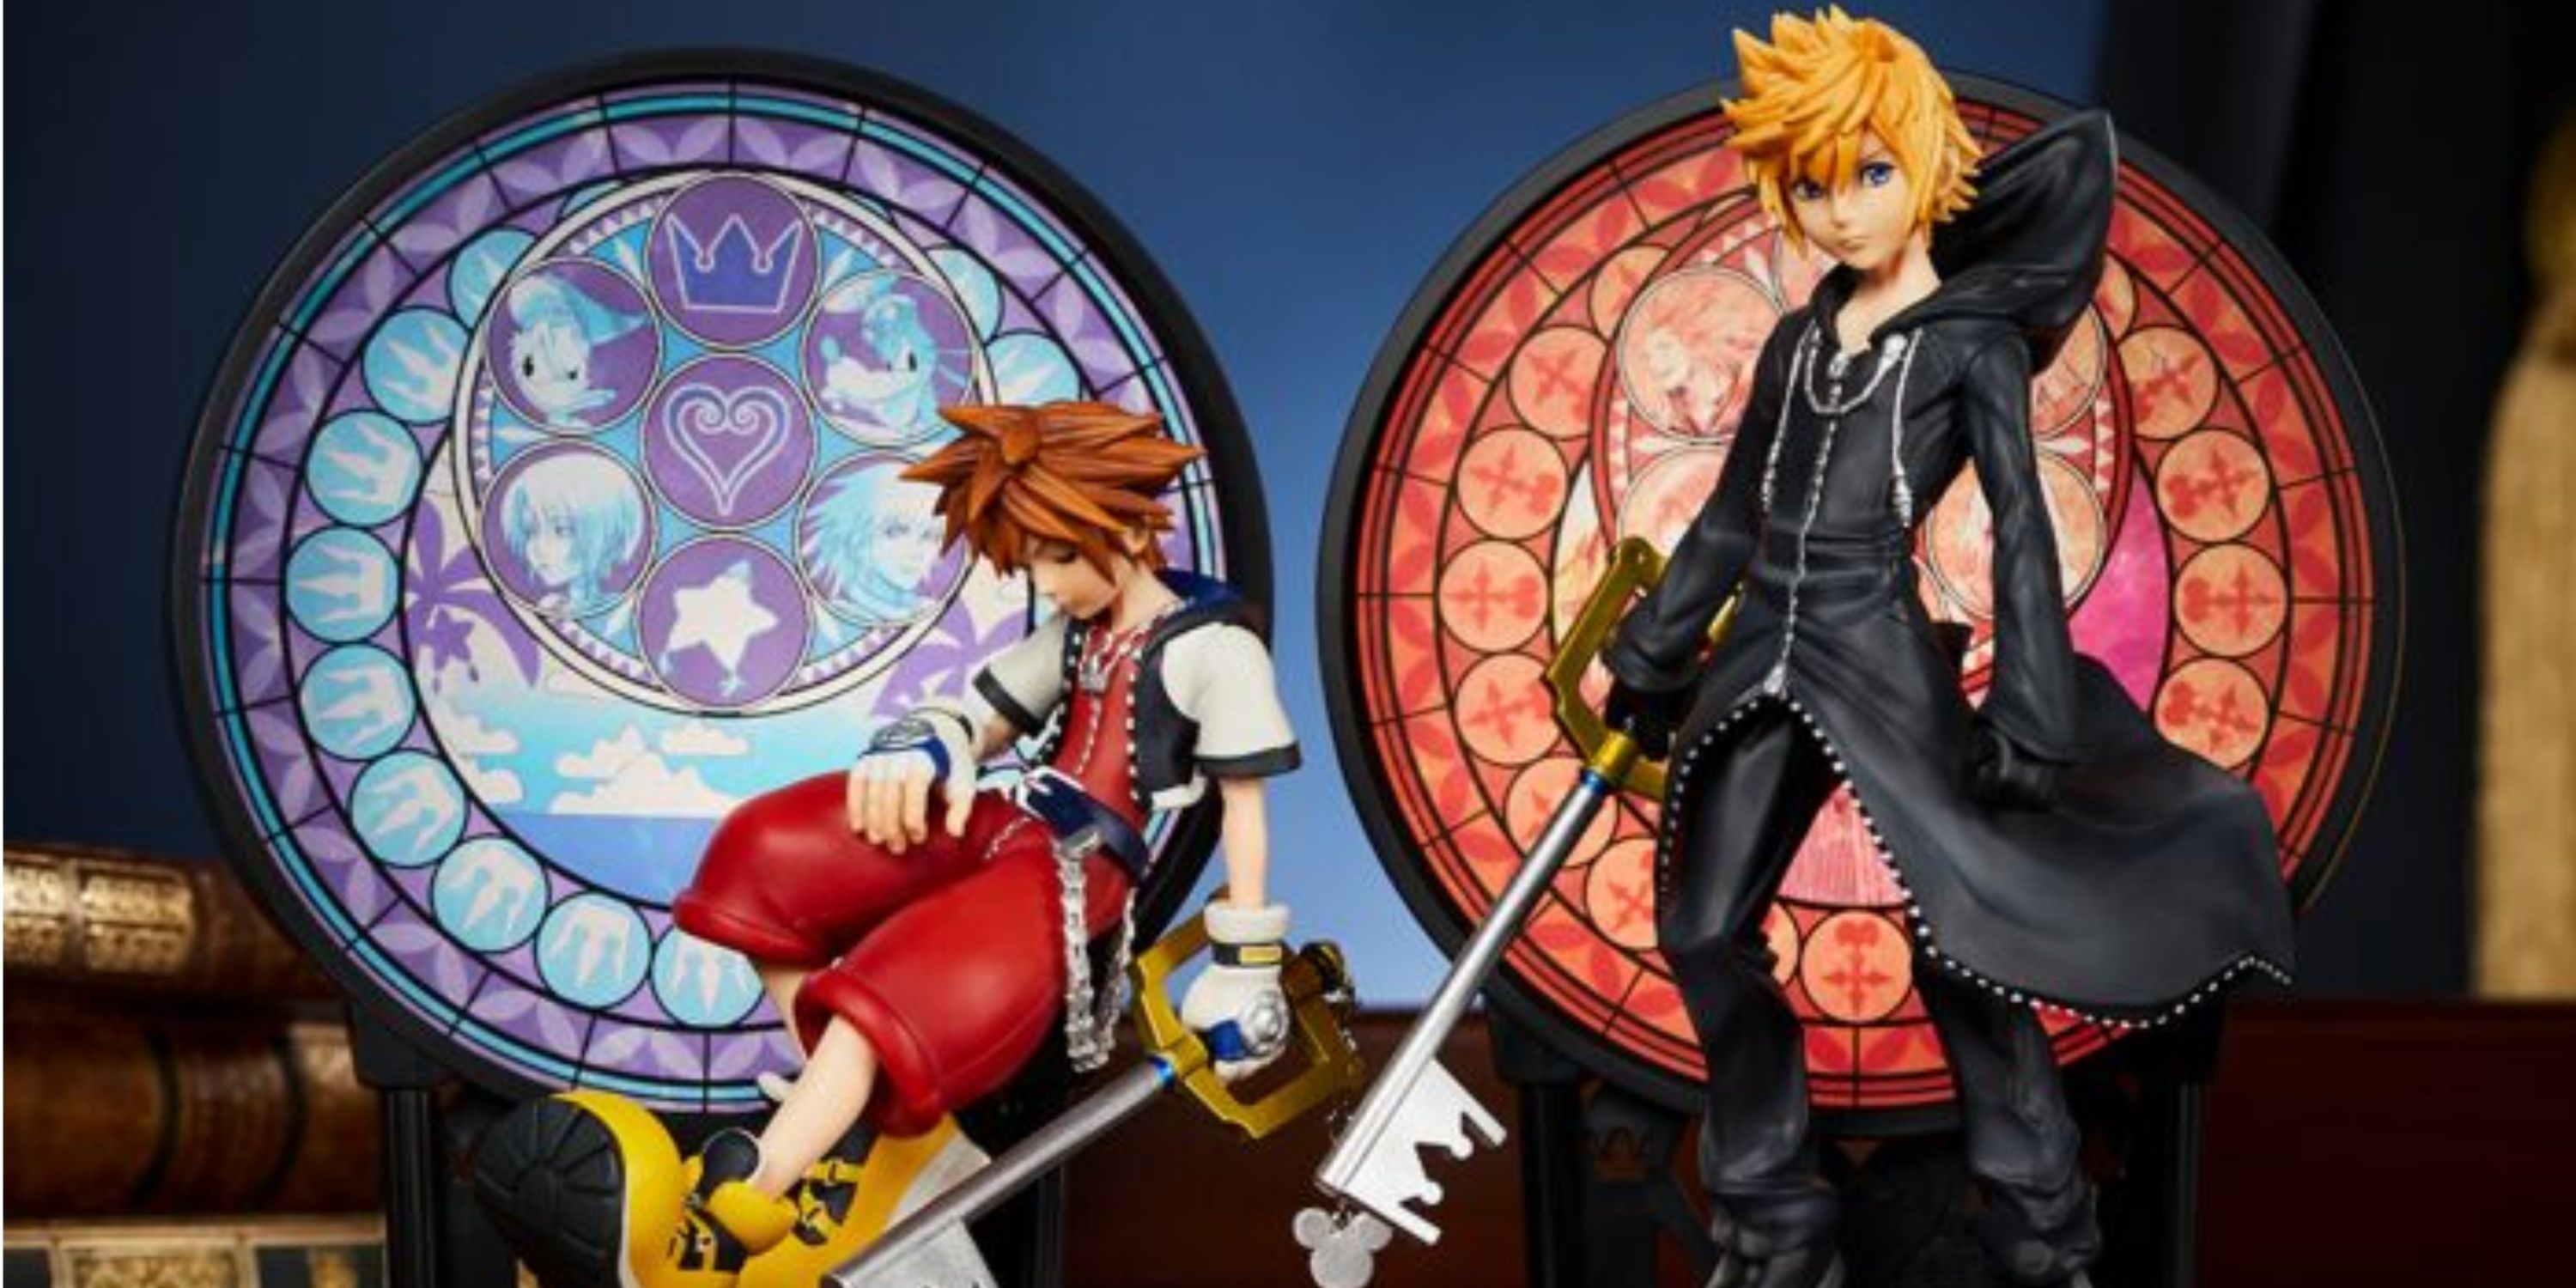 Sora and Roxas stained-glass figures next to each other.